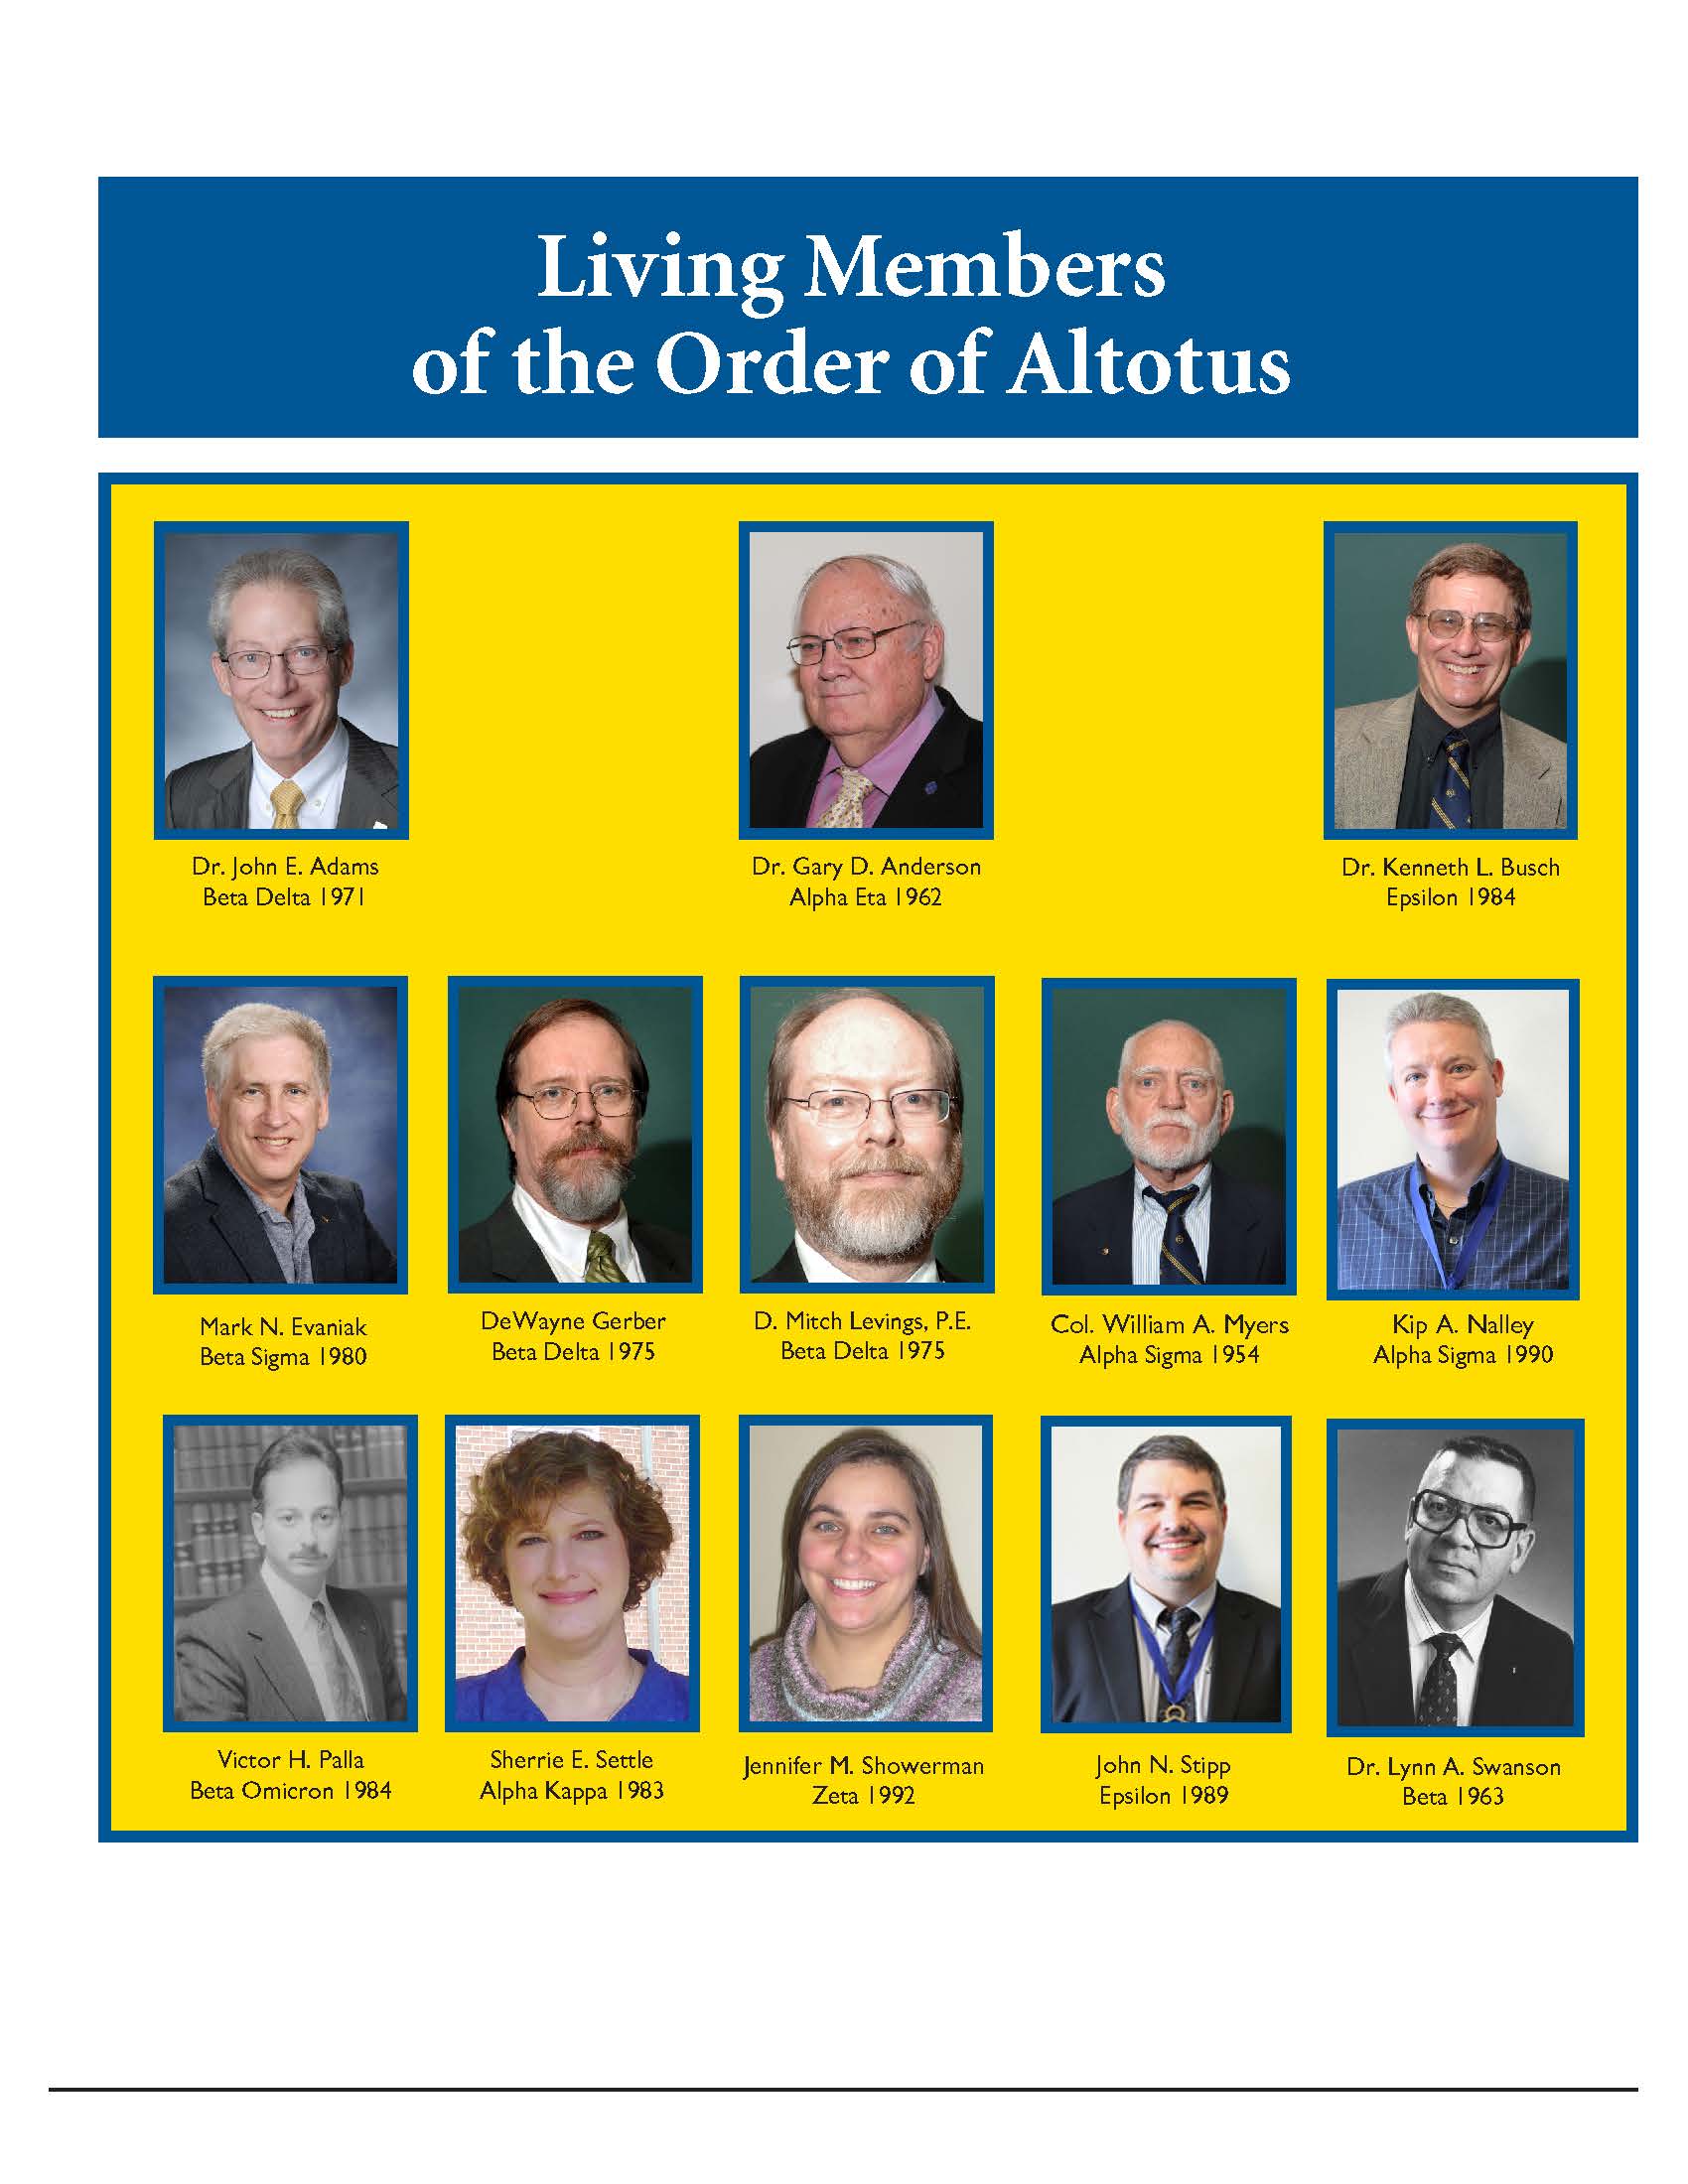 photos of living members of the Order of Altotus